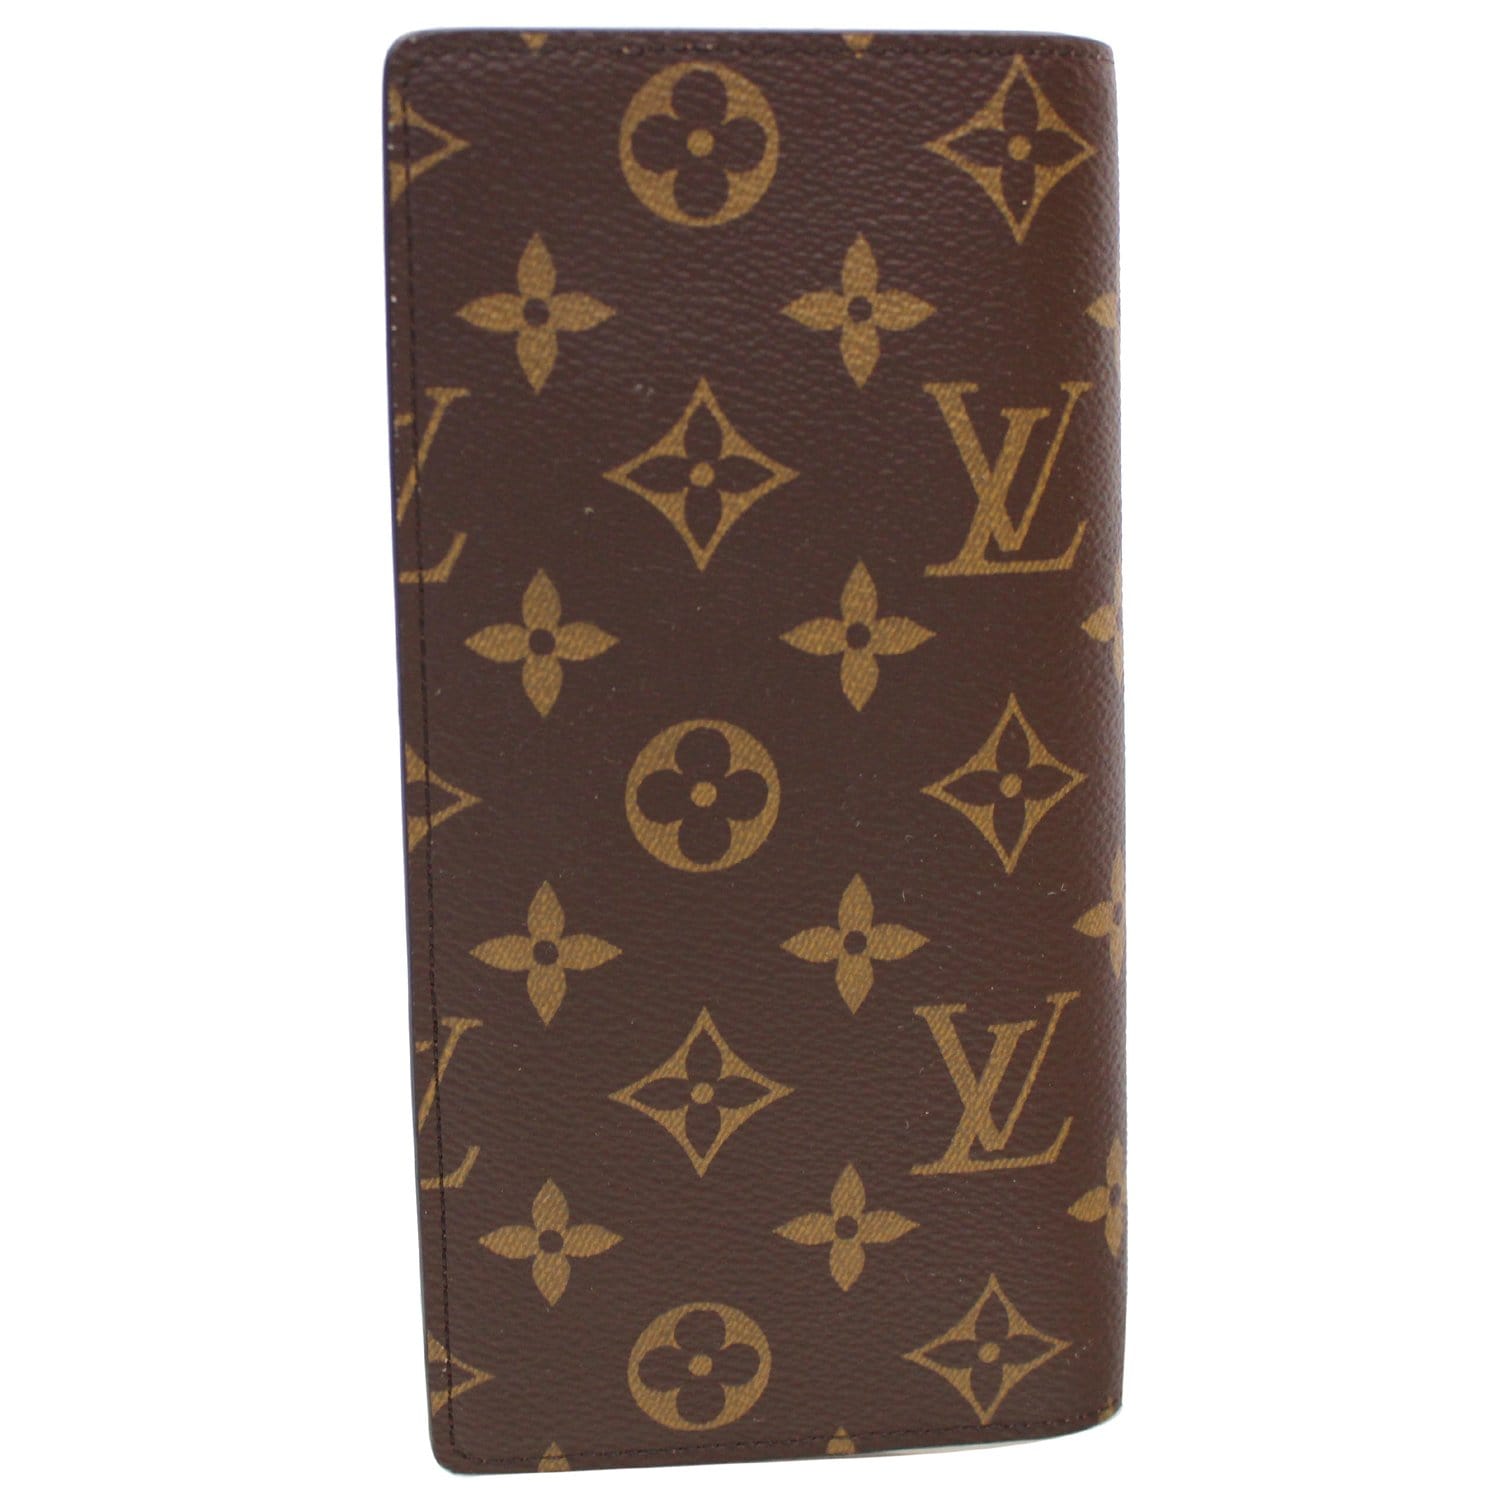 e-glampot.com on Instagram: 7501-1 M66540 Brazza Wallet in Monogram Canvas  *RFID* Condition: New 10/10 Remarks: Brand new, kept unused. Includes:  receipt (28/11/22, Midvalley), message card + ribbonb, dustbag, box and  paperbag Current